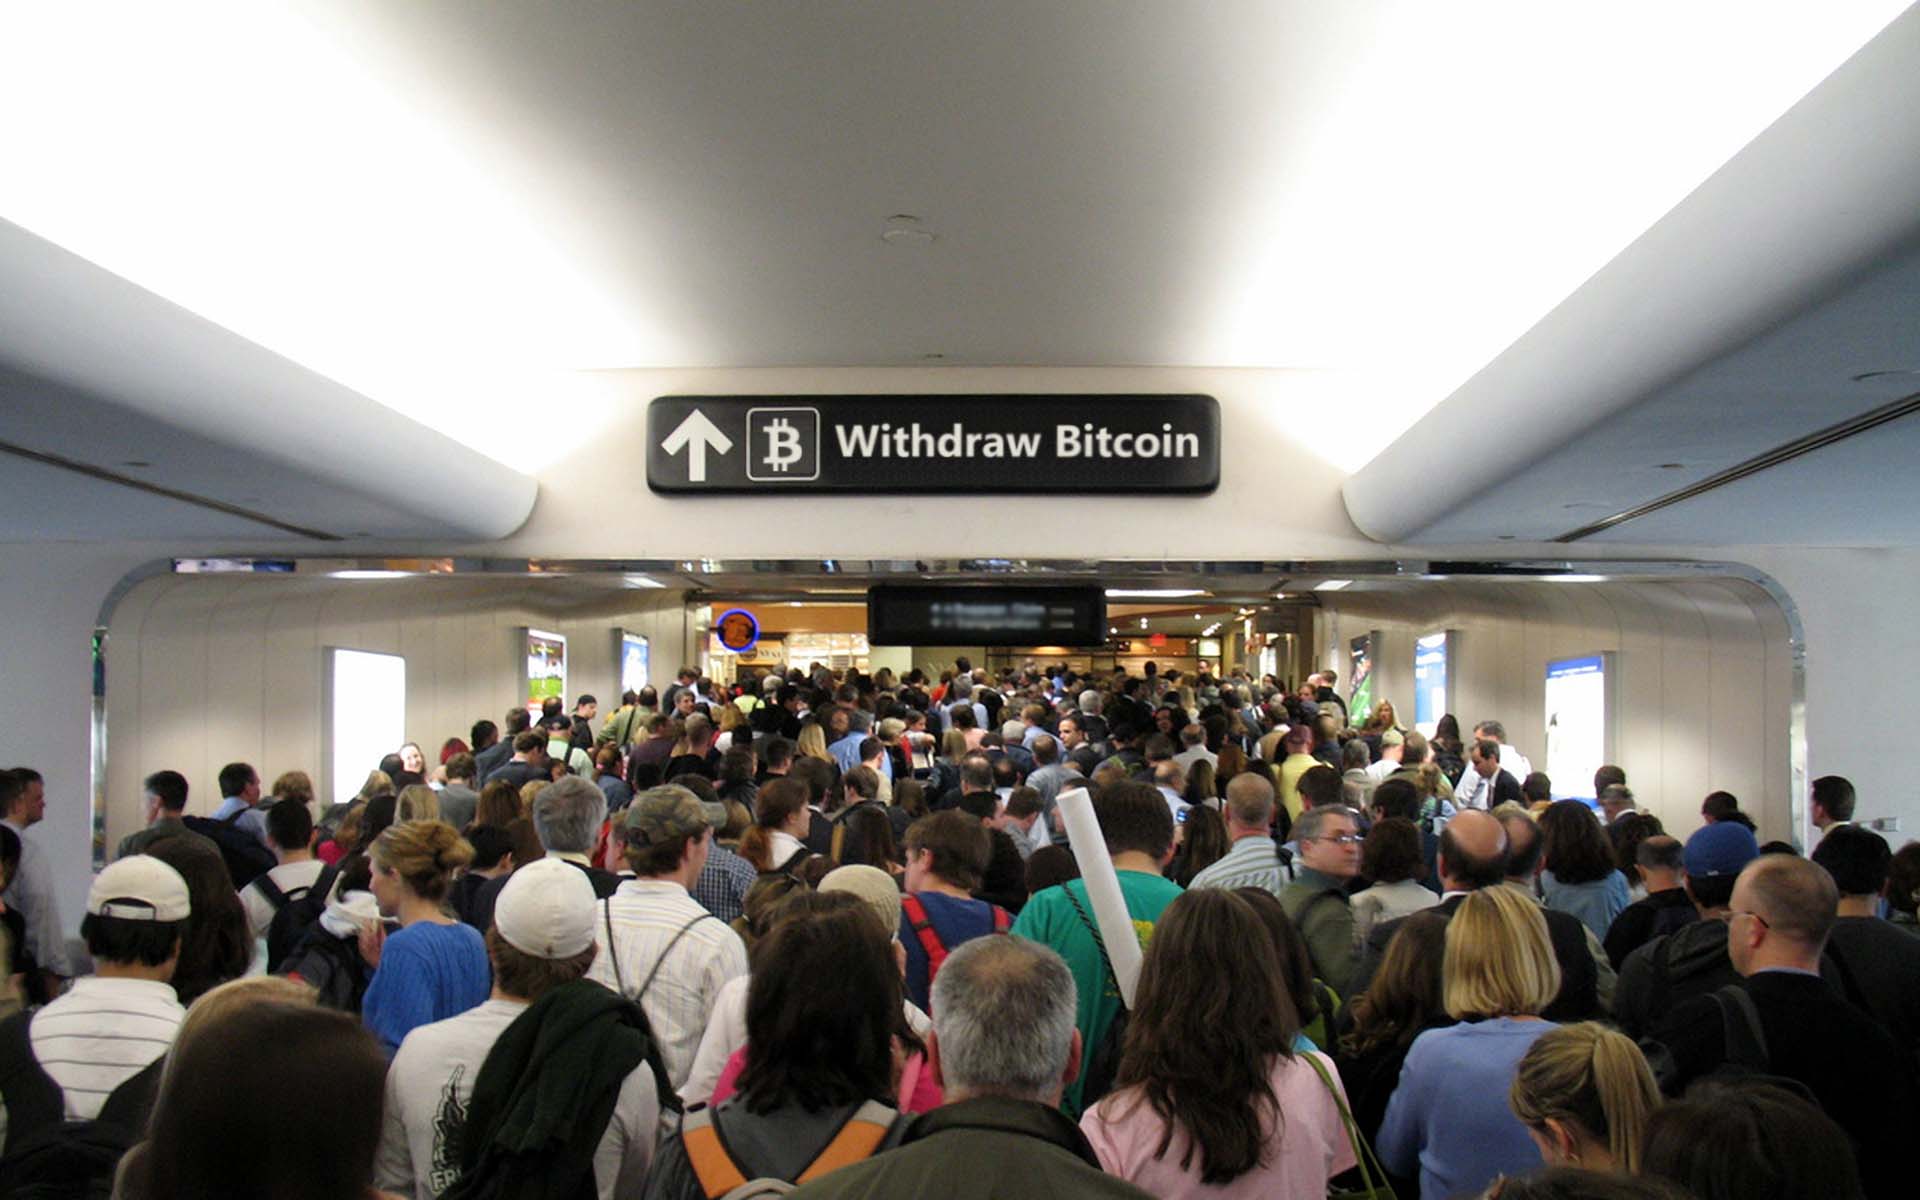 Mass Exodus from Coinbase Spawns 12 Hour Bitcoin Withdrawal Delays